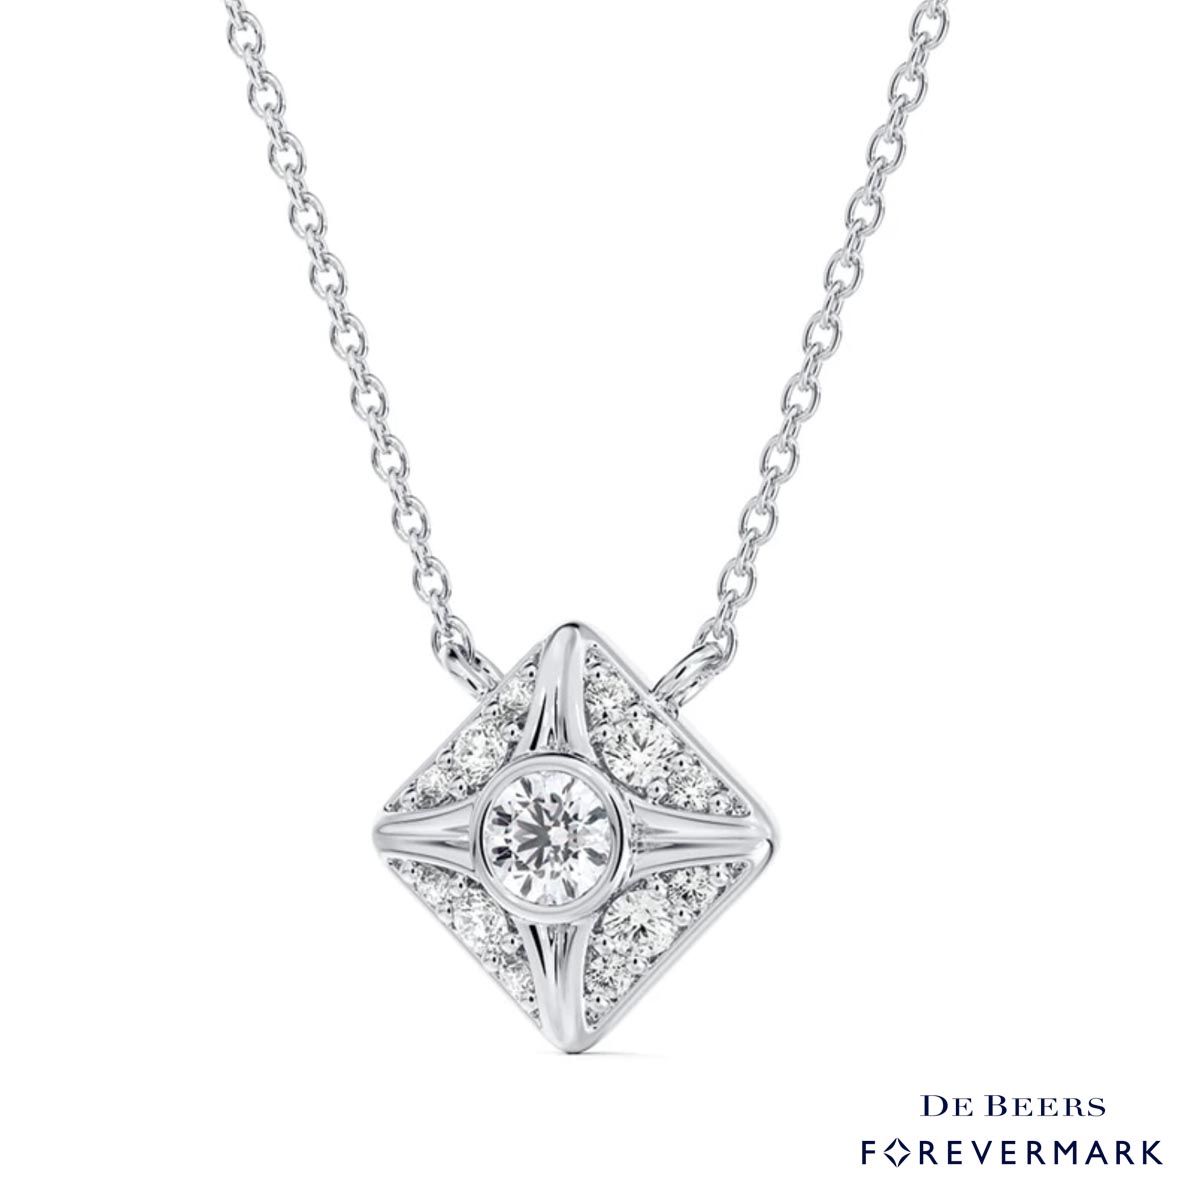 De Beers Forevermark Icon Pave Necklace in 18kt White Gold (1/4ct tw)